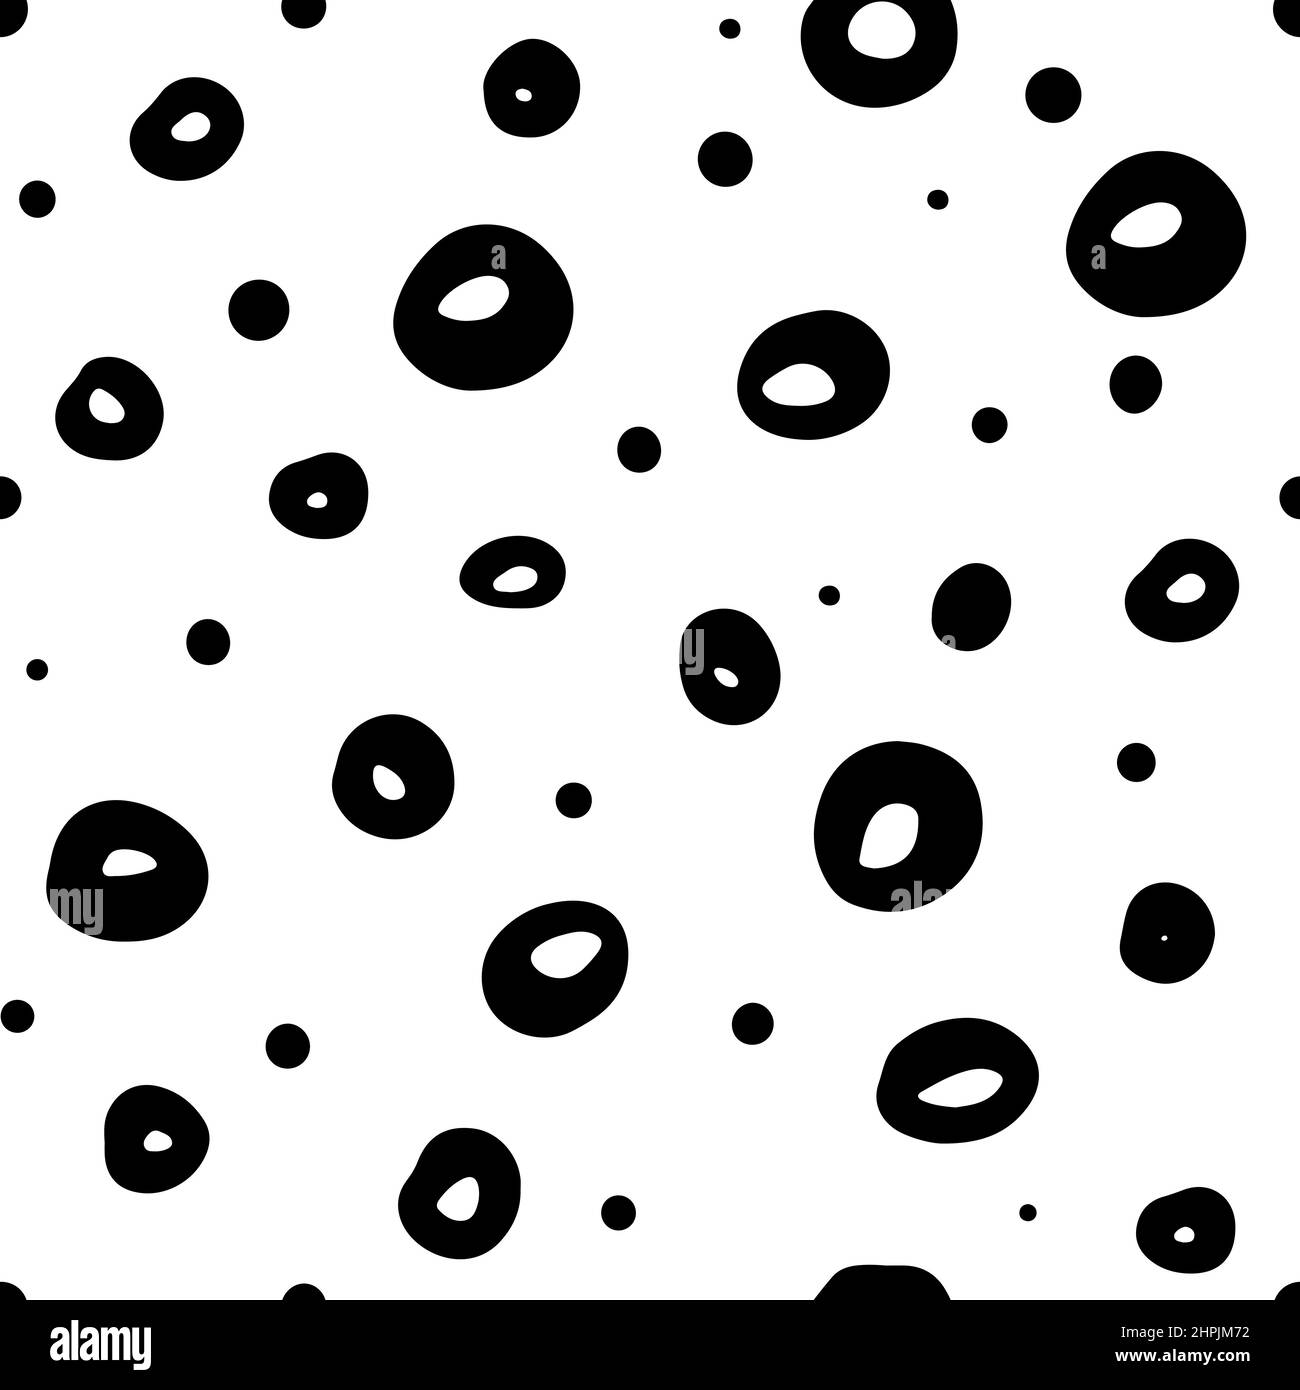 Stylish and minimalistic modern seamless pattern with black circles and dots Stock Vector